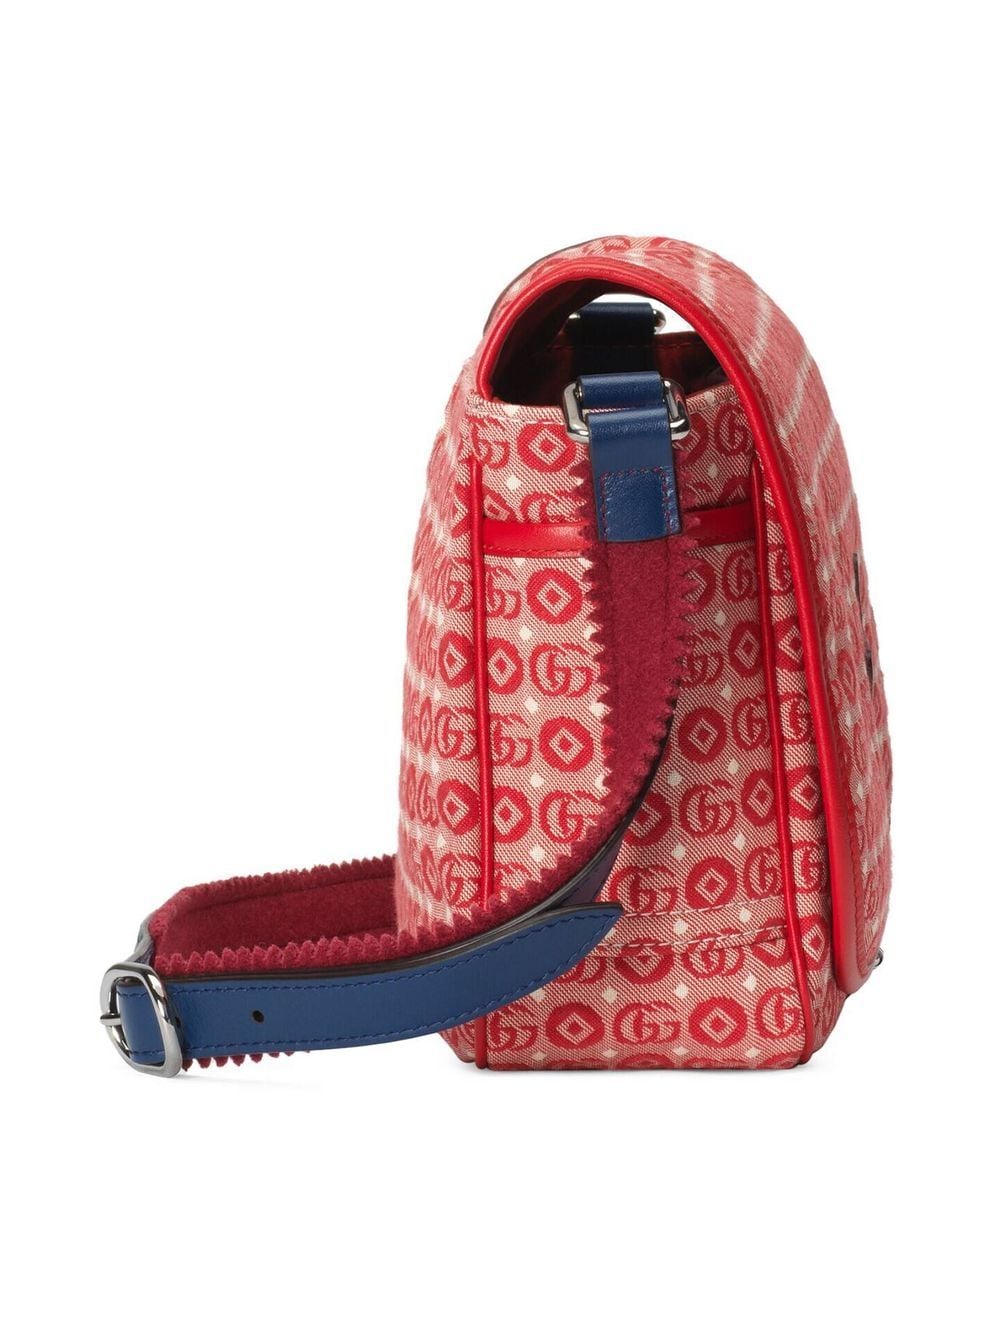 Red bag for girls with logo